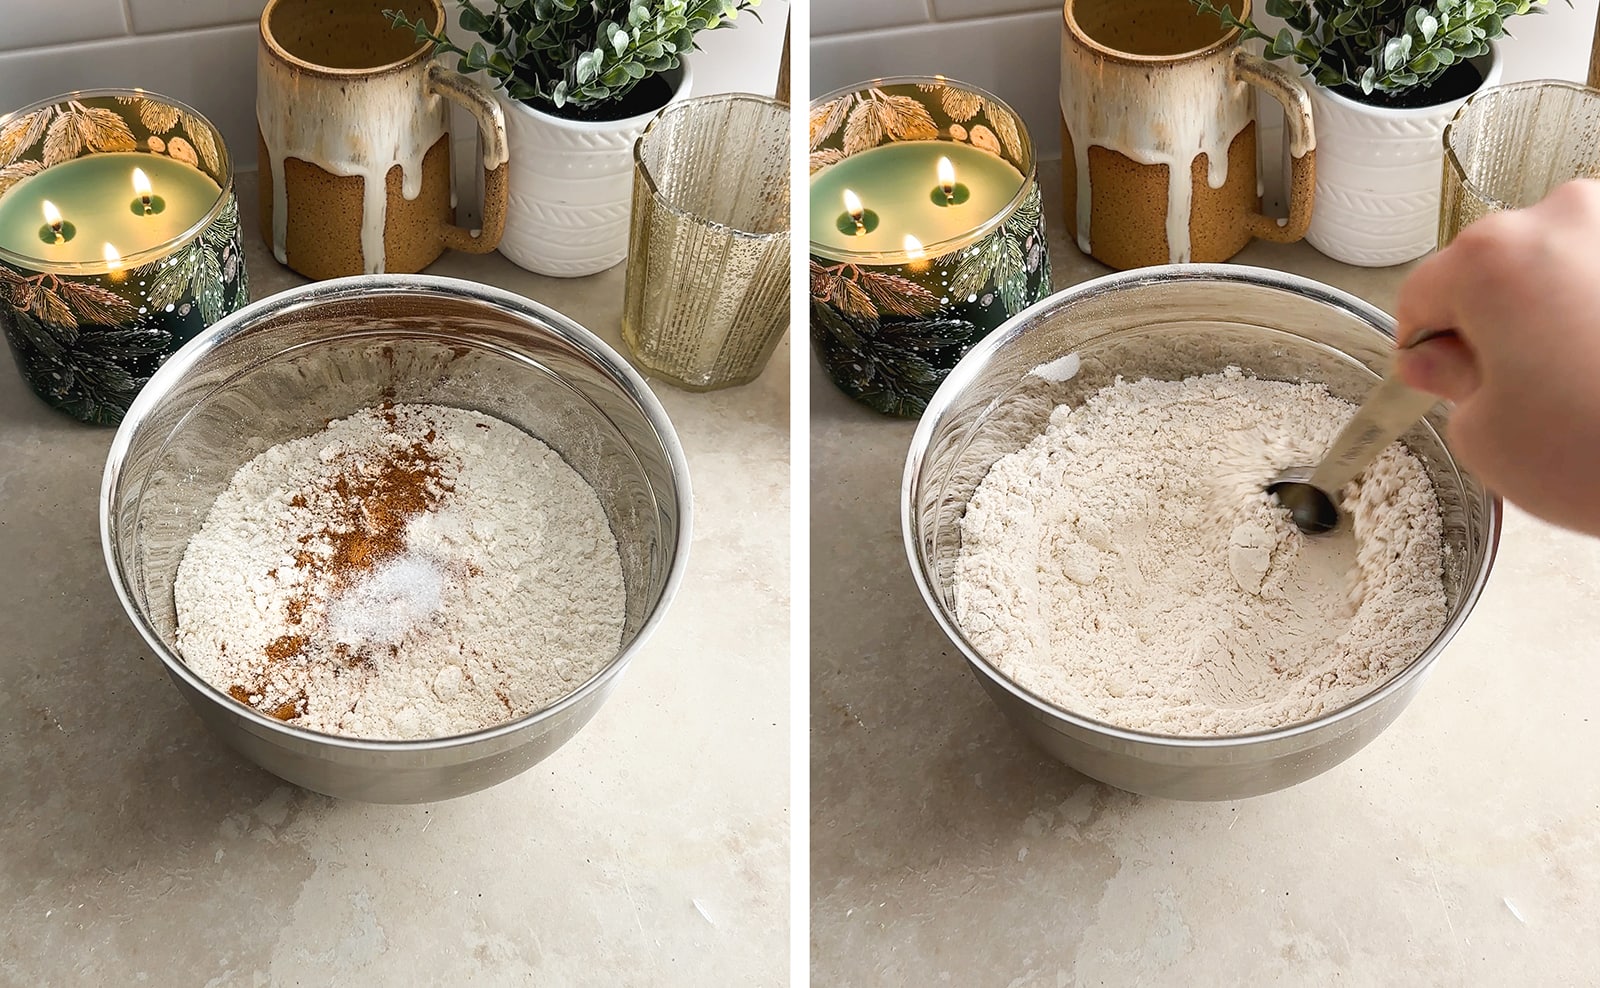 Left to right: dry ingredients in a bowl, stirring dry ingredients together with a spoon.